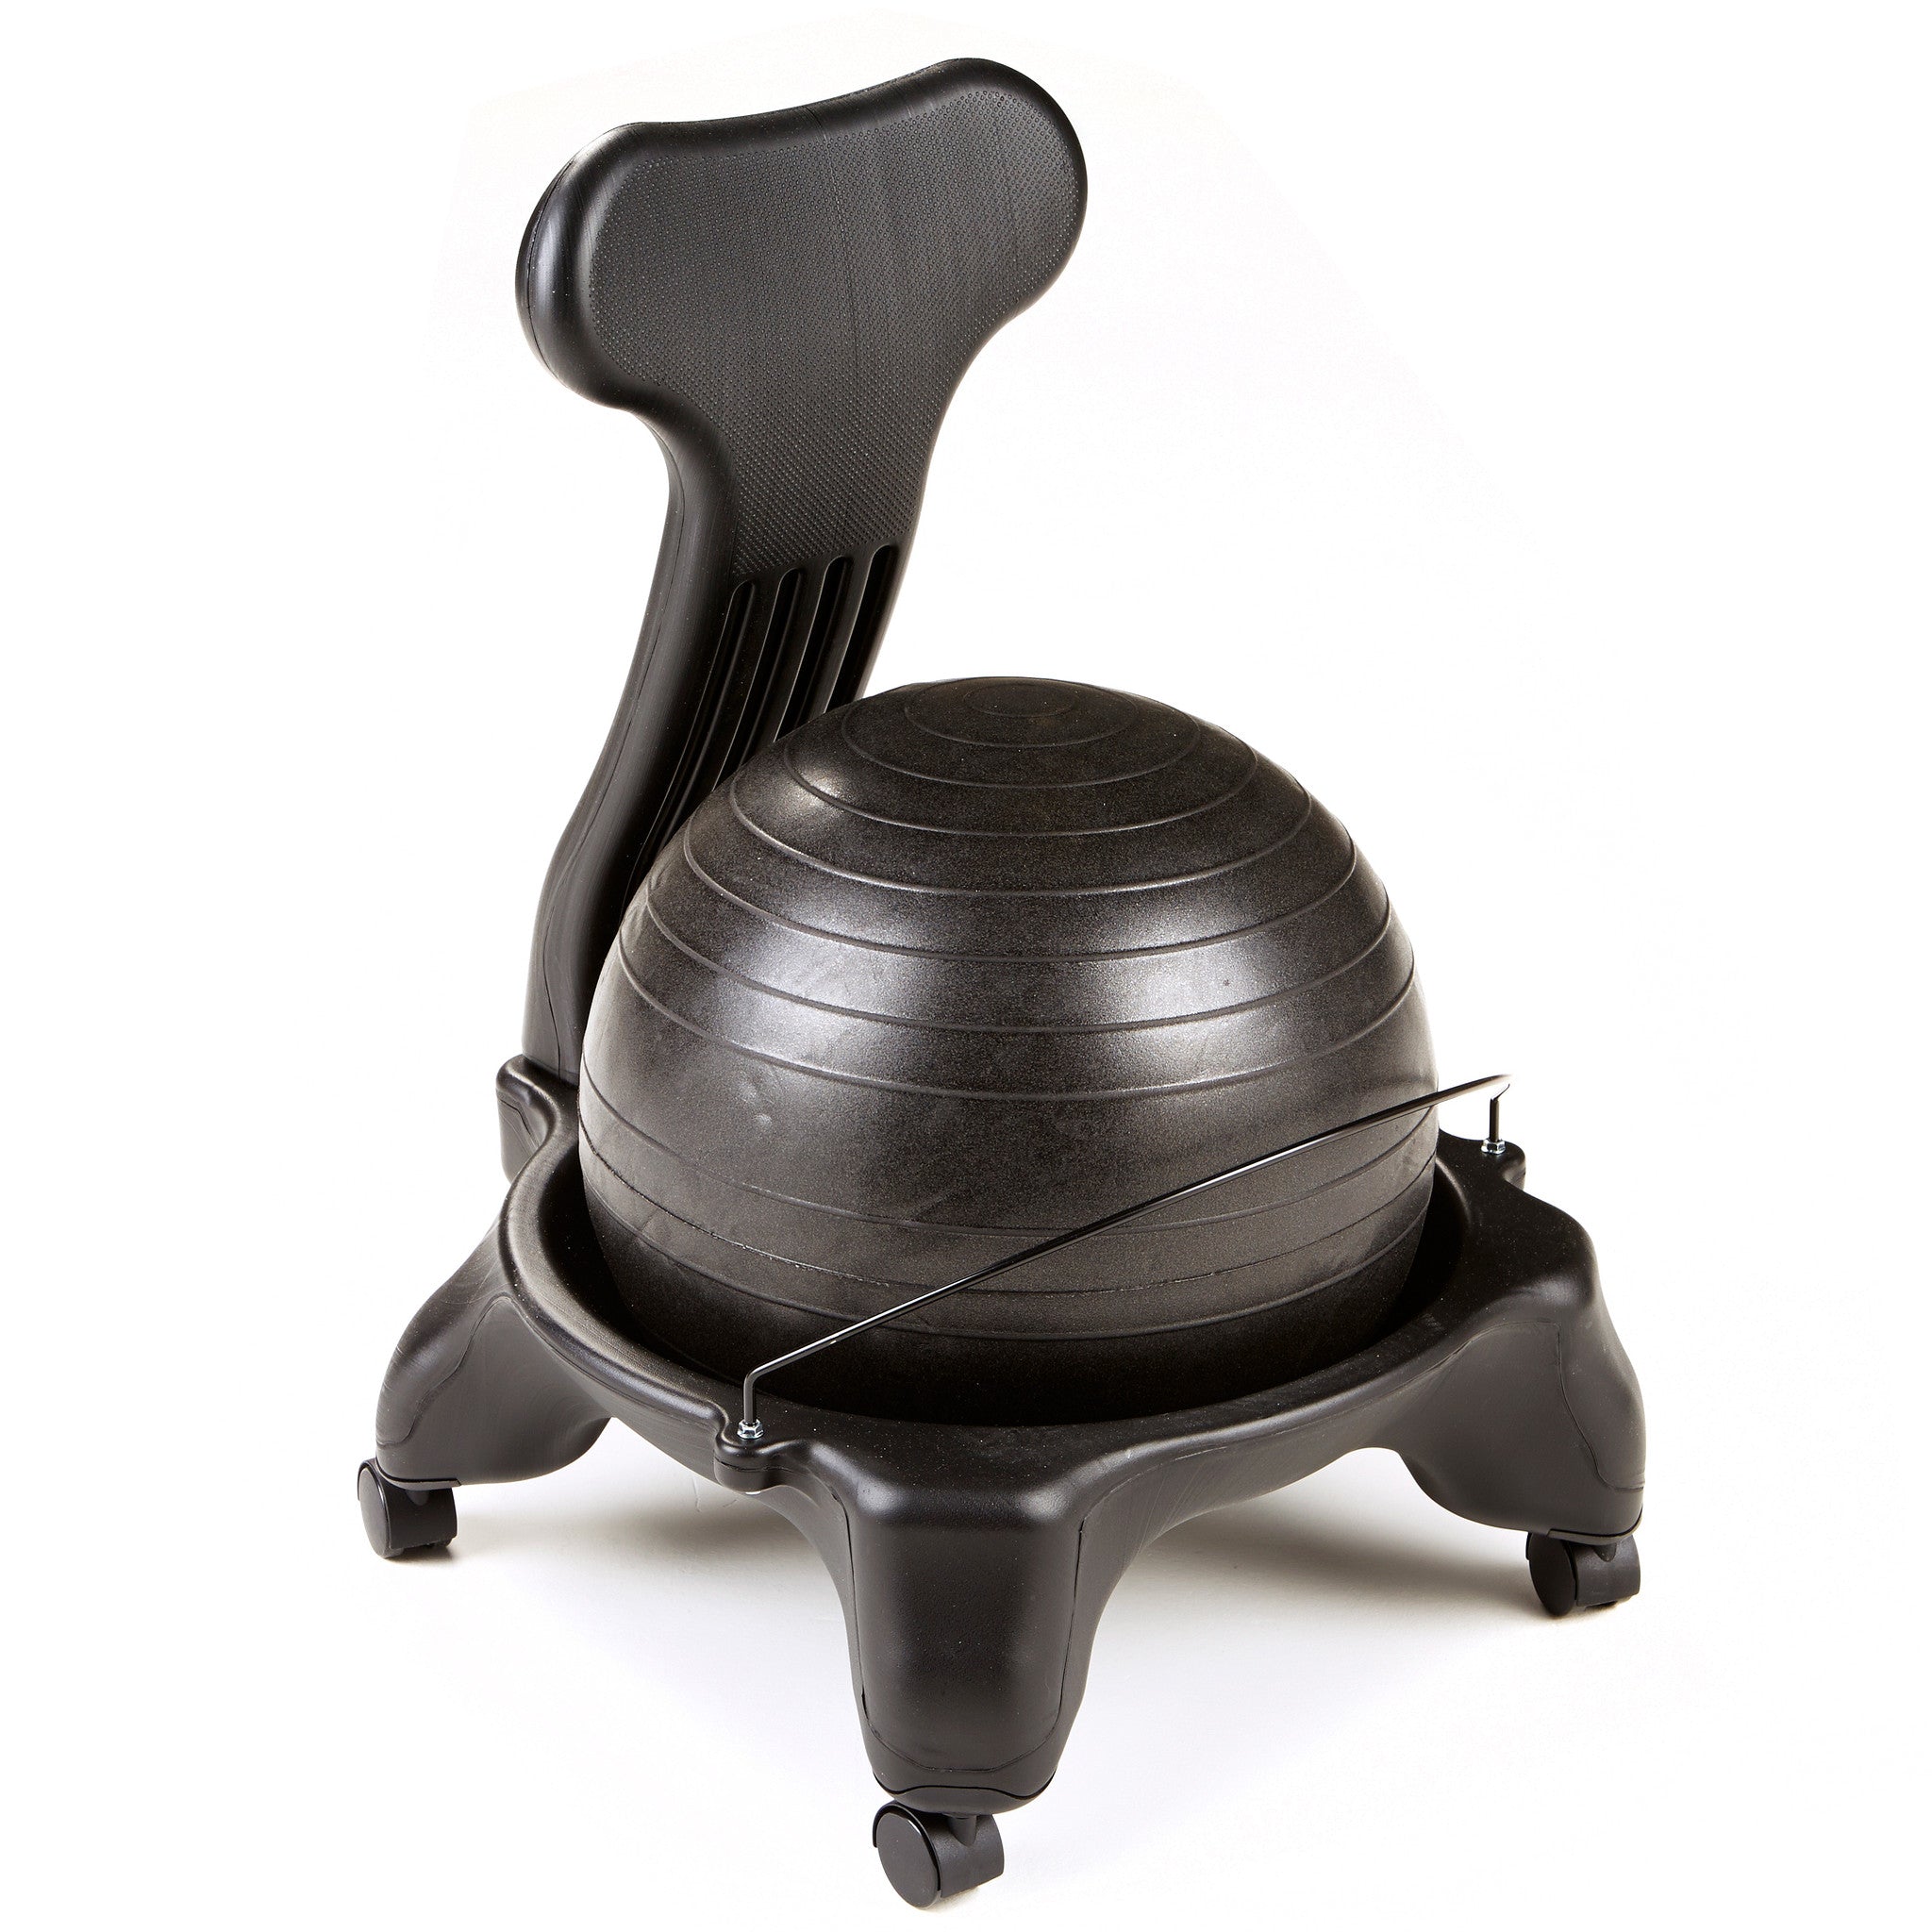 Fitness Balance Ball Chair in black